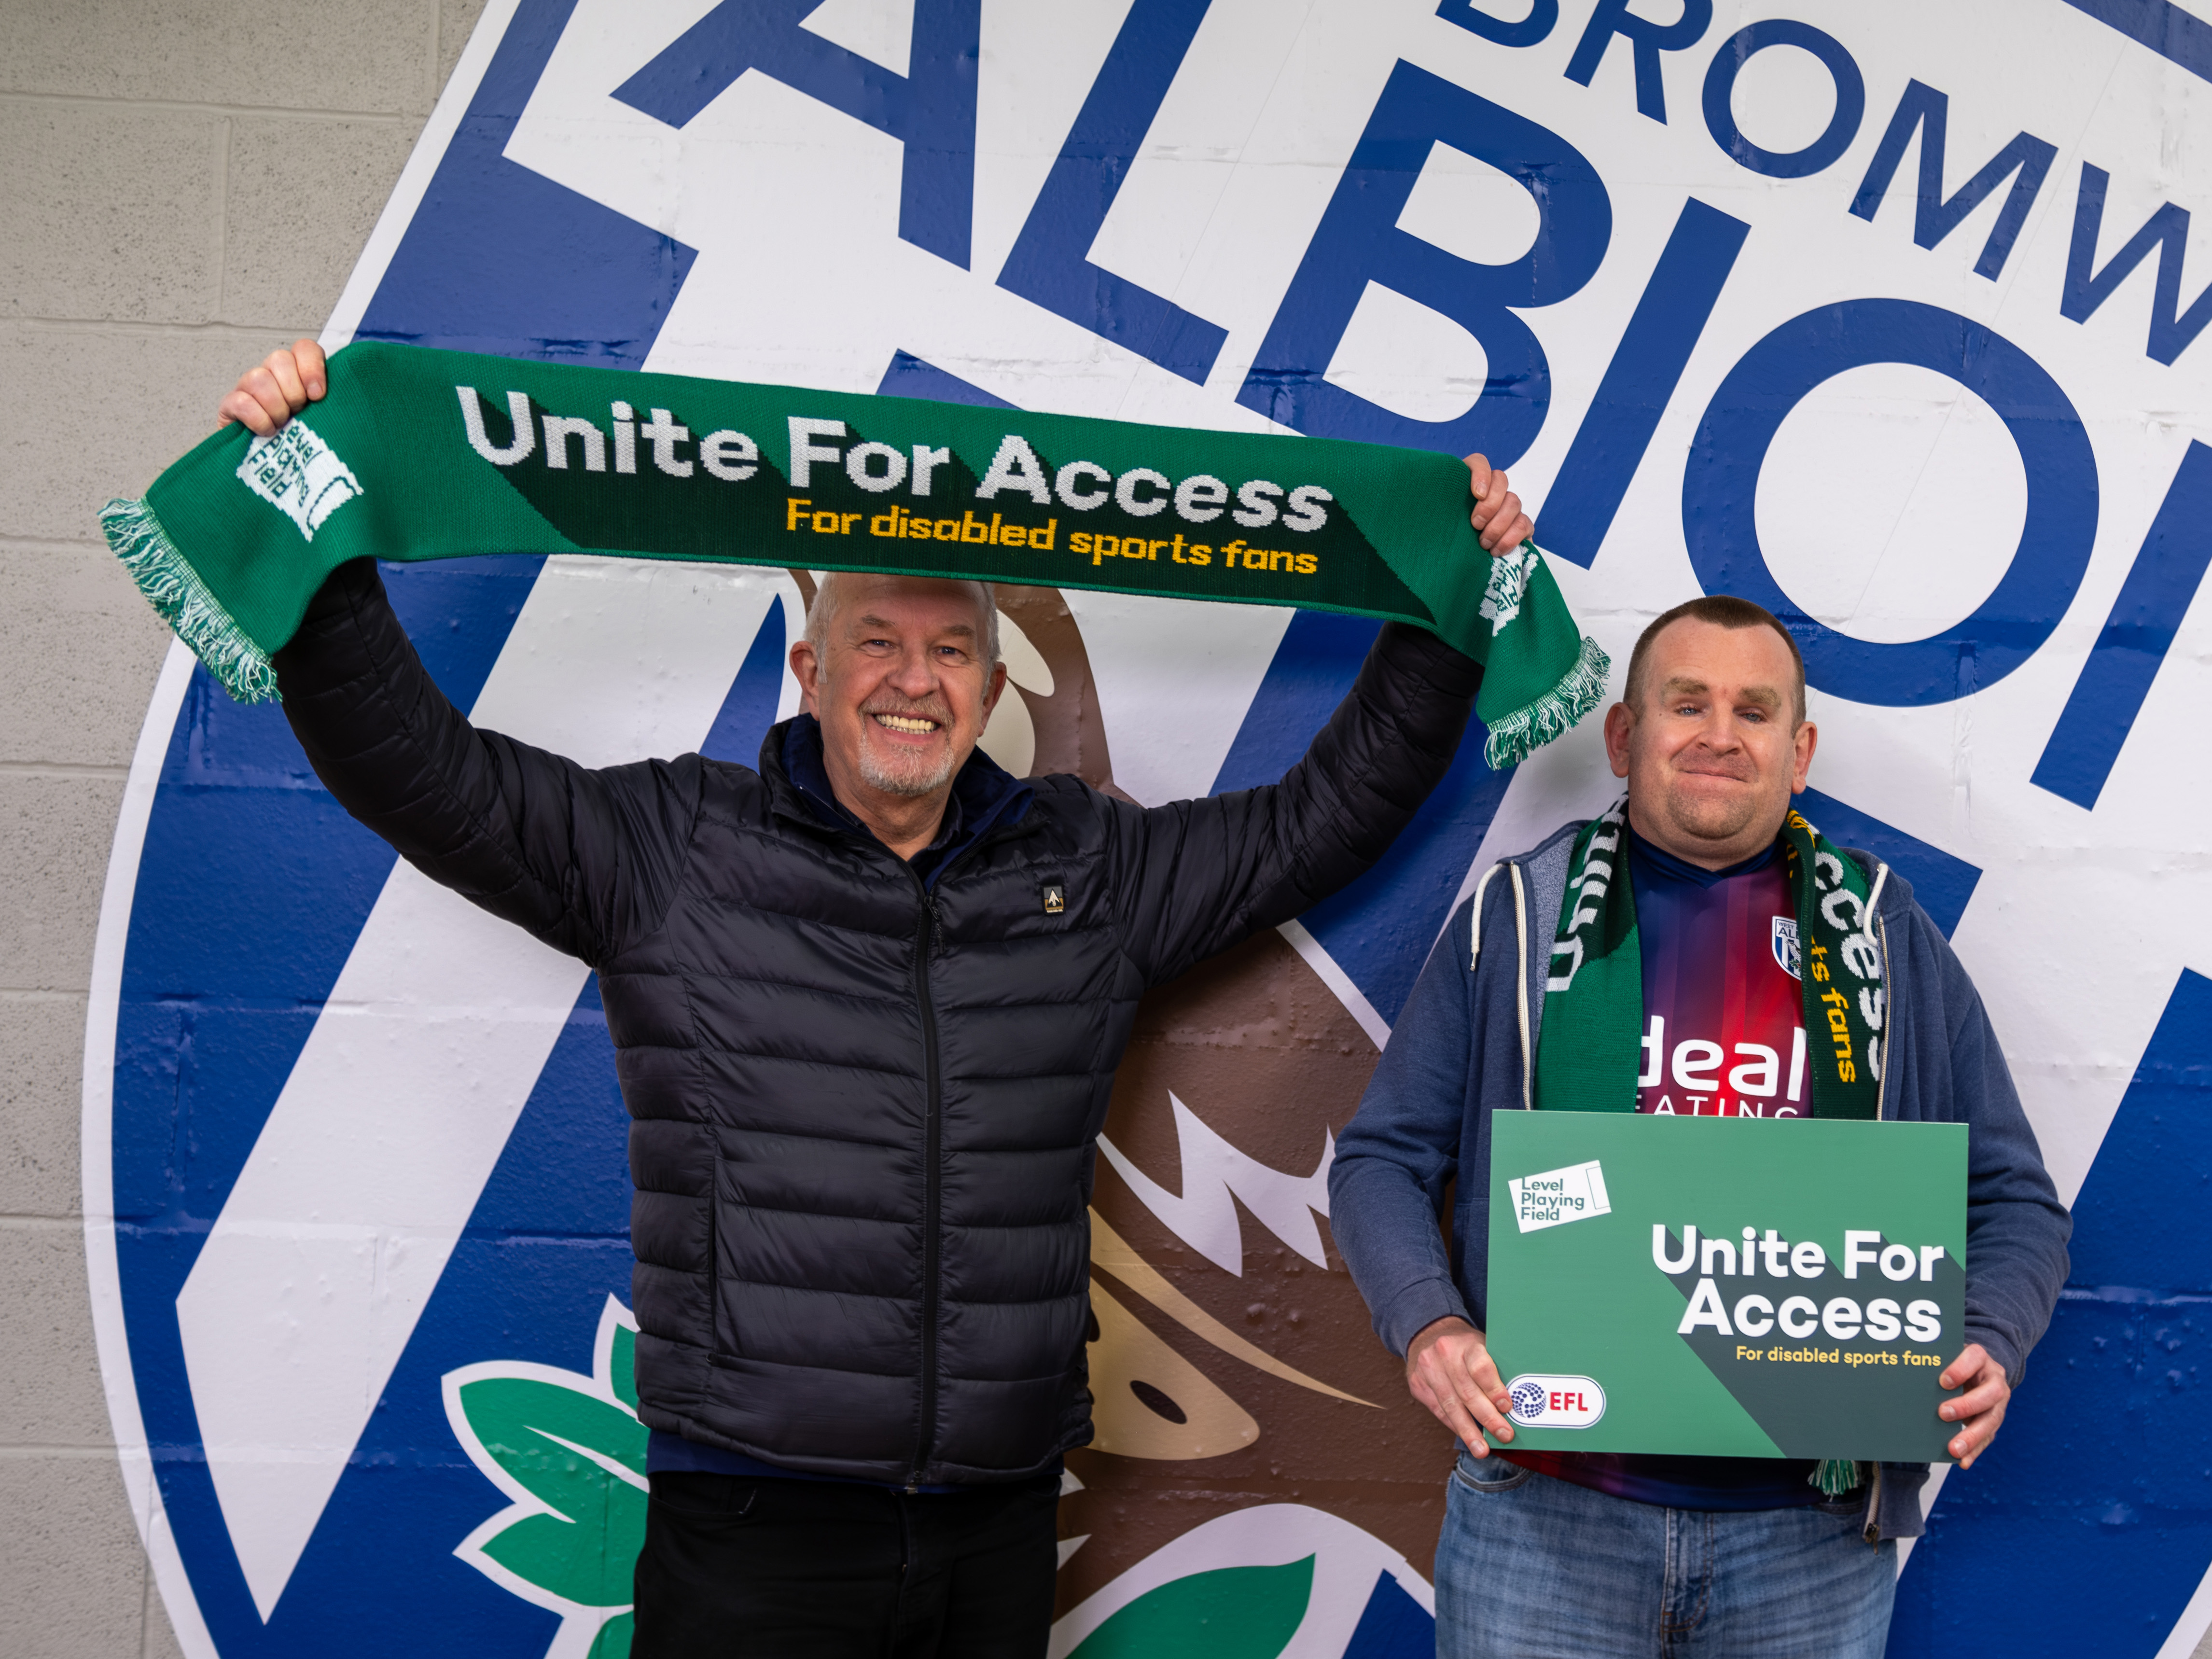 West Bromwich Albion's Head of Health, Safety and Facilities Management Chris Harris and a Baggies fan holding up Level Playing Field branding while stood in front of a big Albion badge